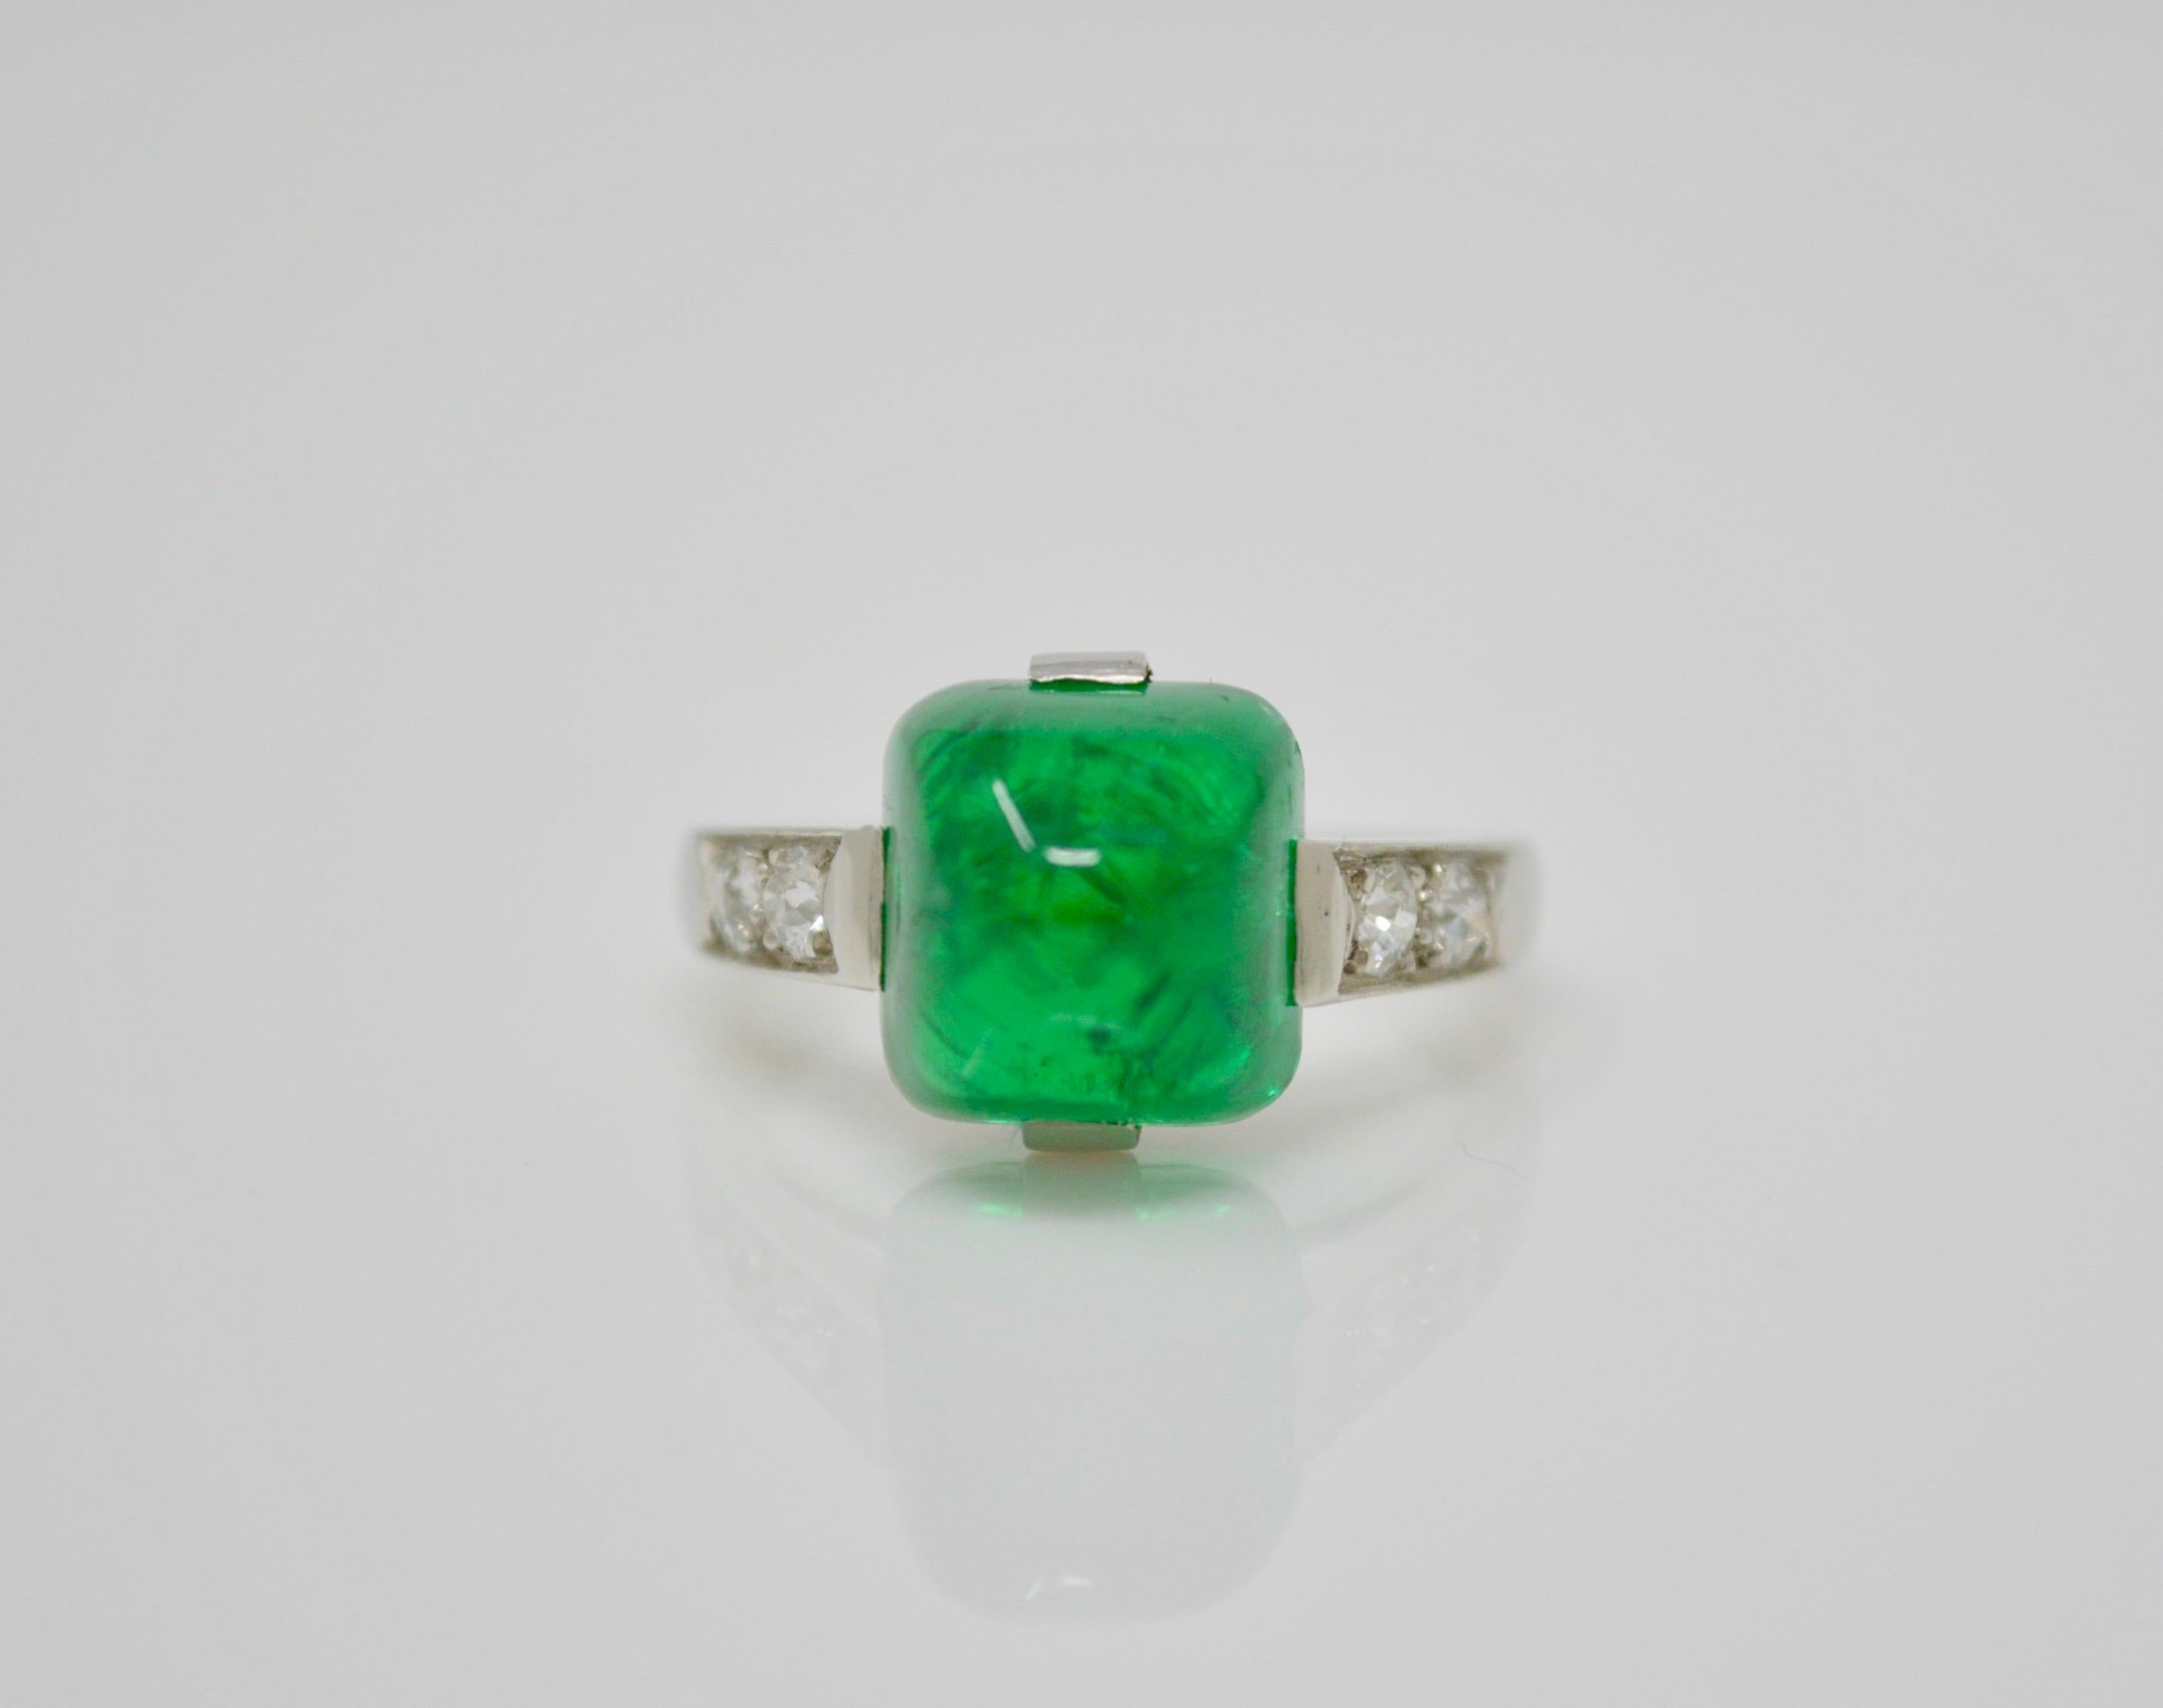 This stunning antique art deco ring features a luscious columbian emerald sugar loaf no oil weighing 4.68 CTS AGL certified. It is beautifully hand crafted in platinum with small diamonds set in the band. The detailing is exquisite. 